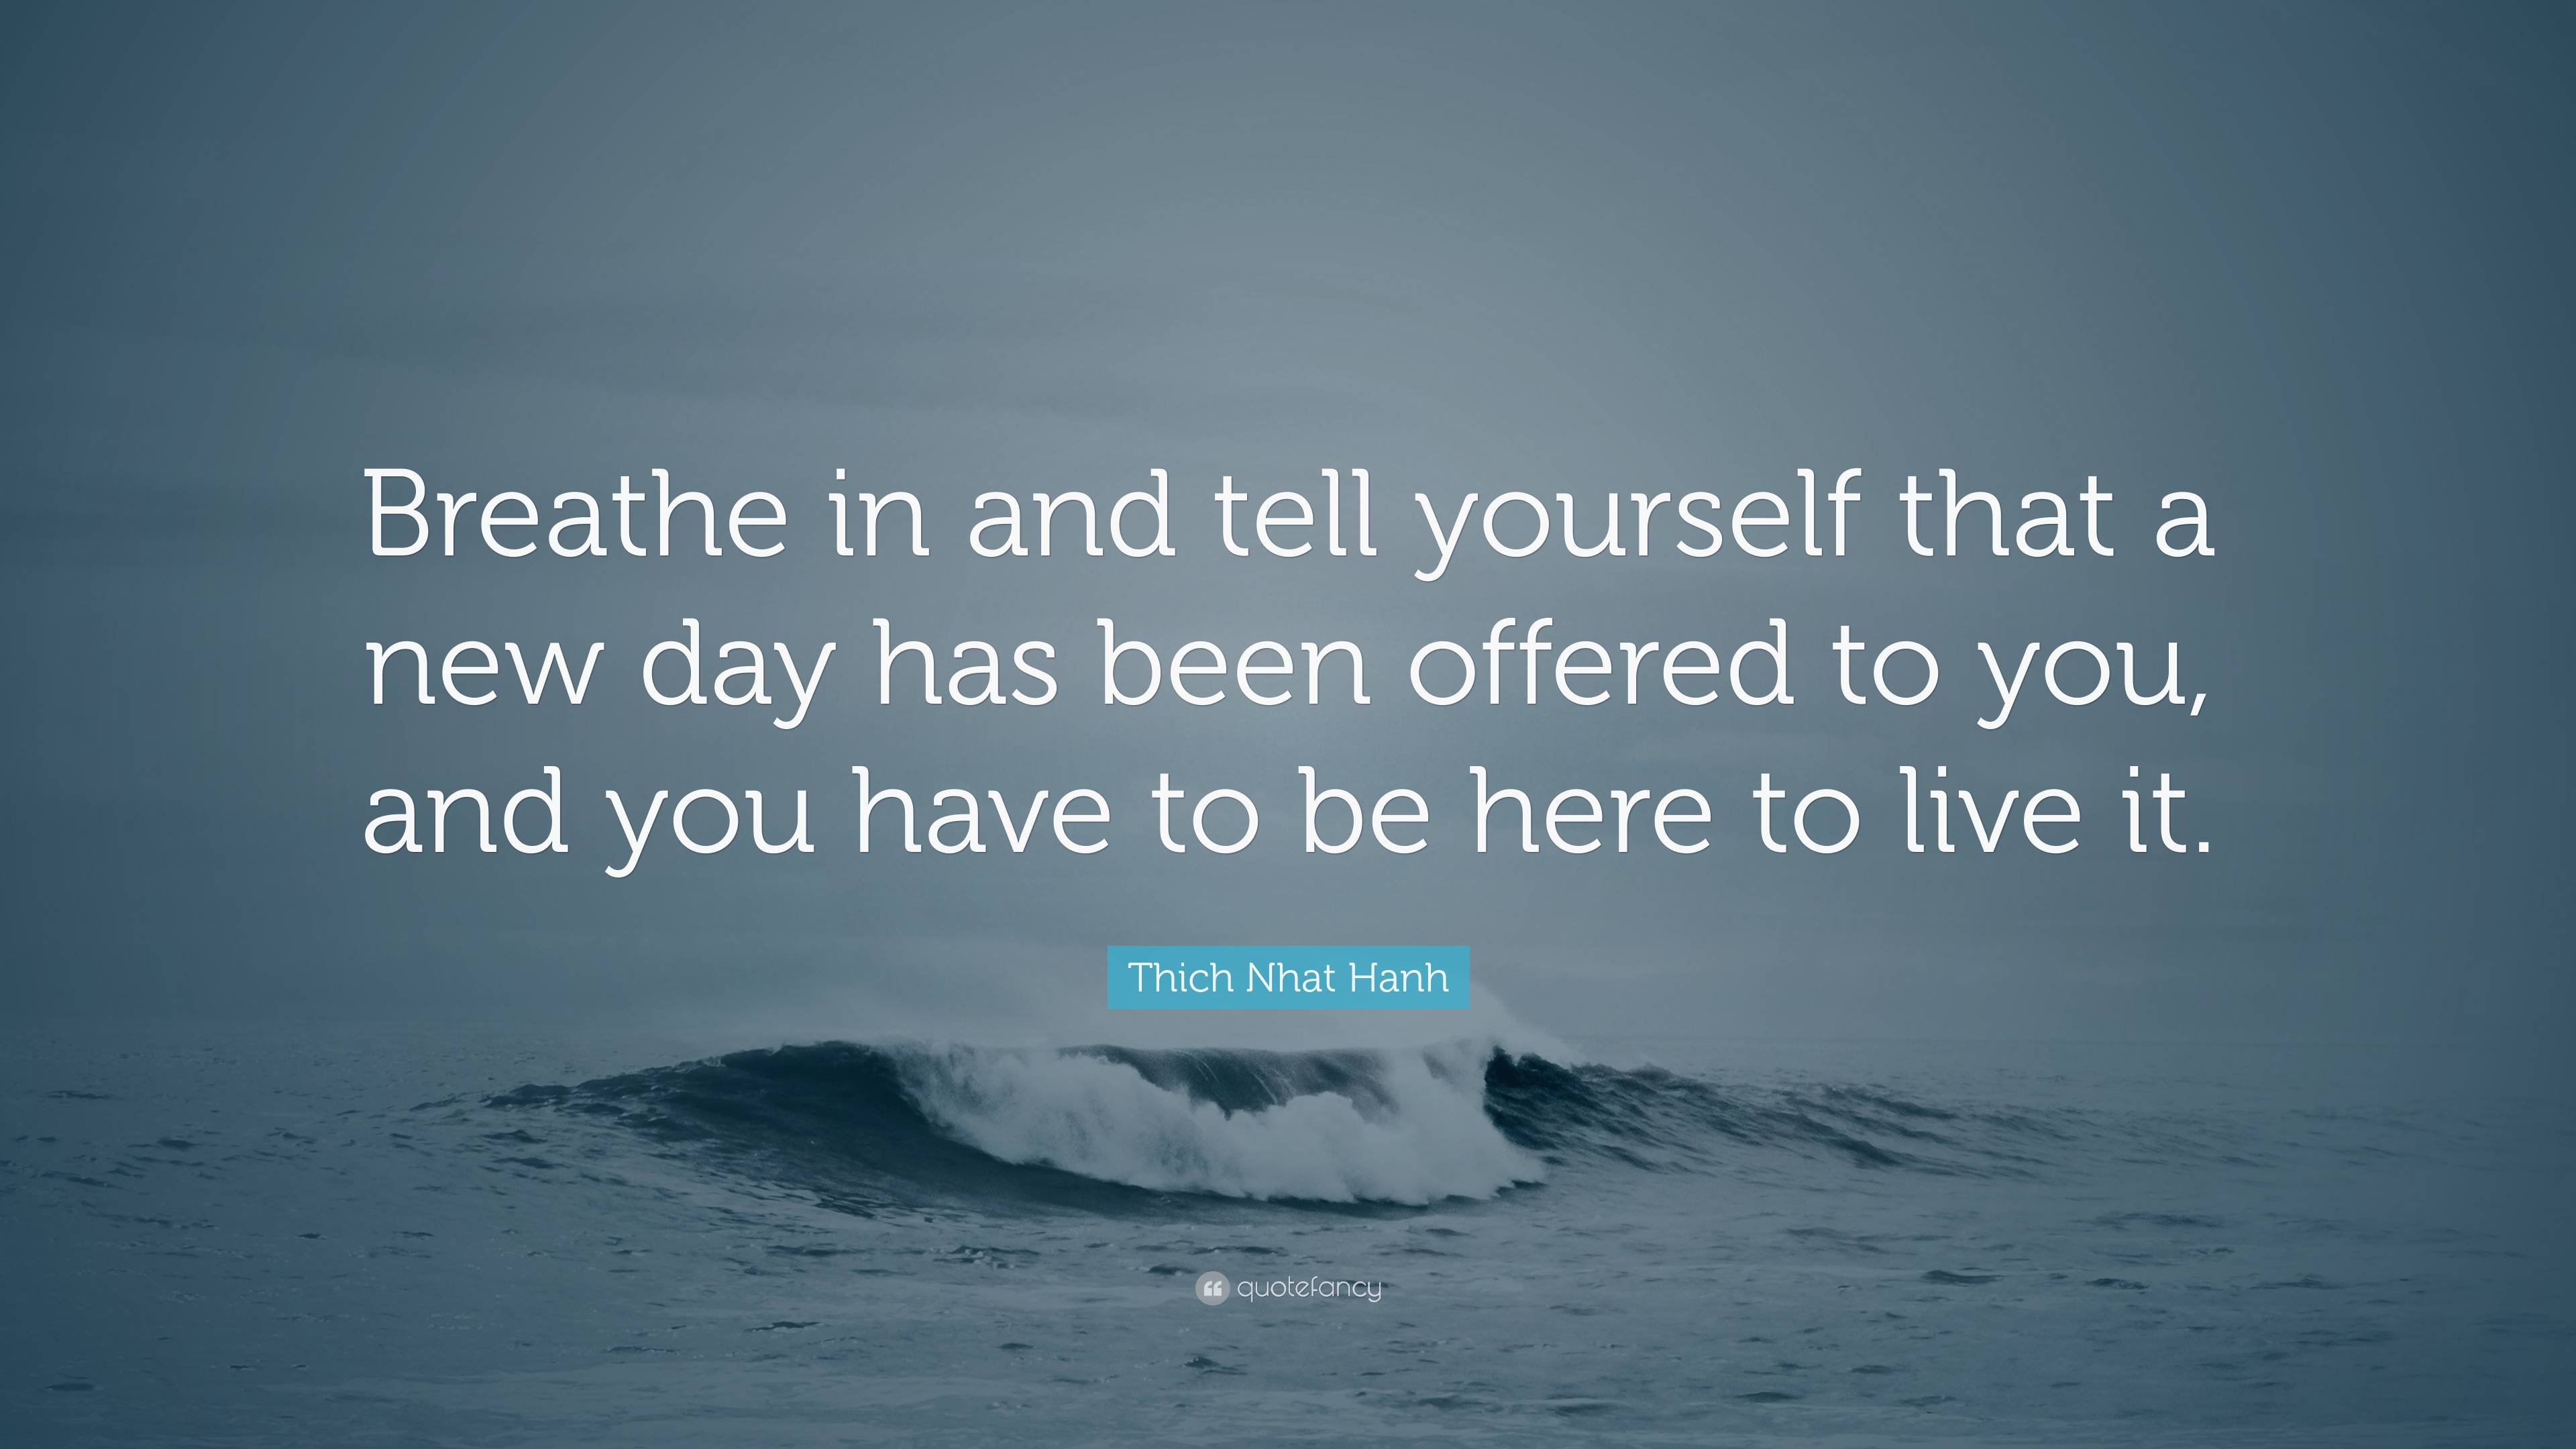 Thich Nhat Hanh Quote: “Breathe in and tell yourself that a new